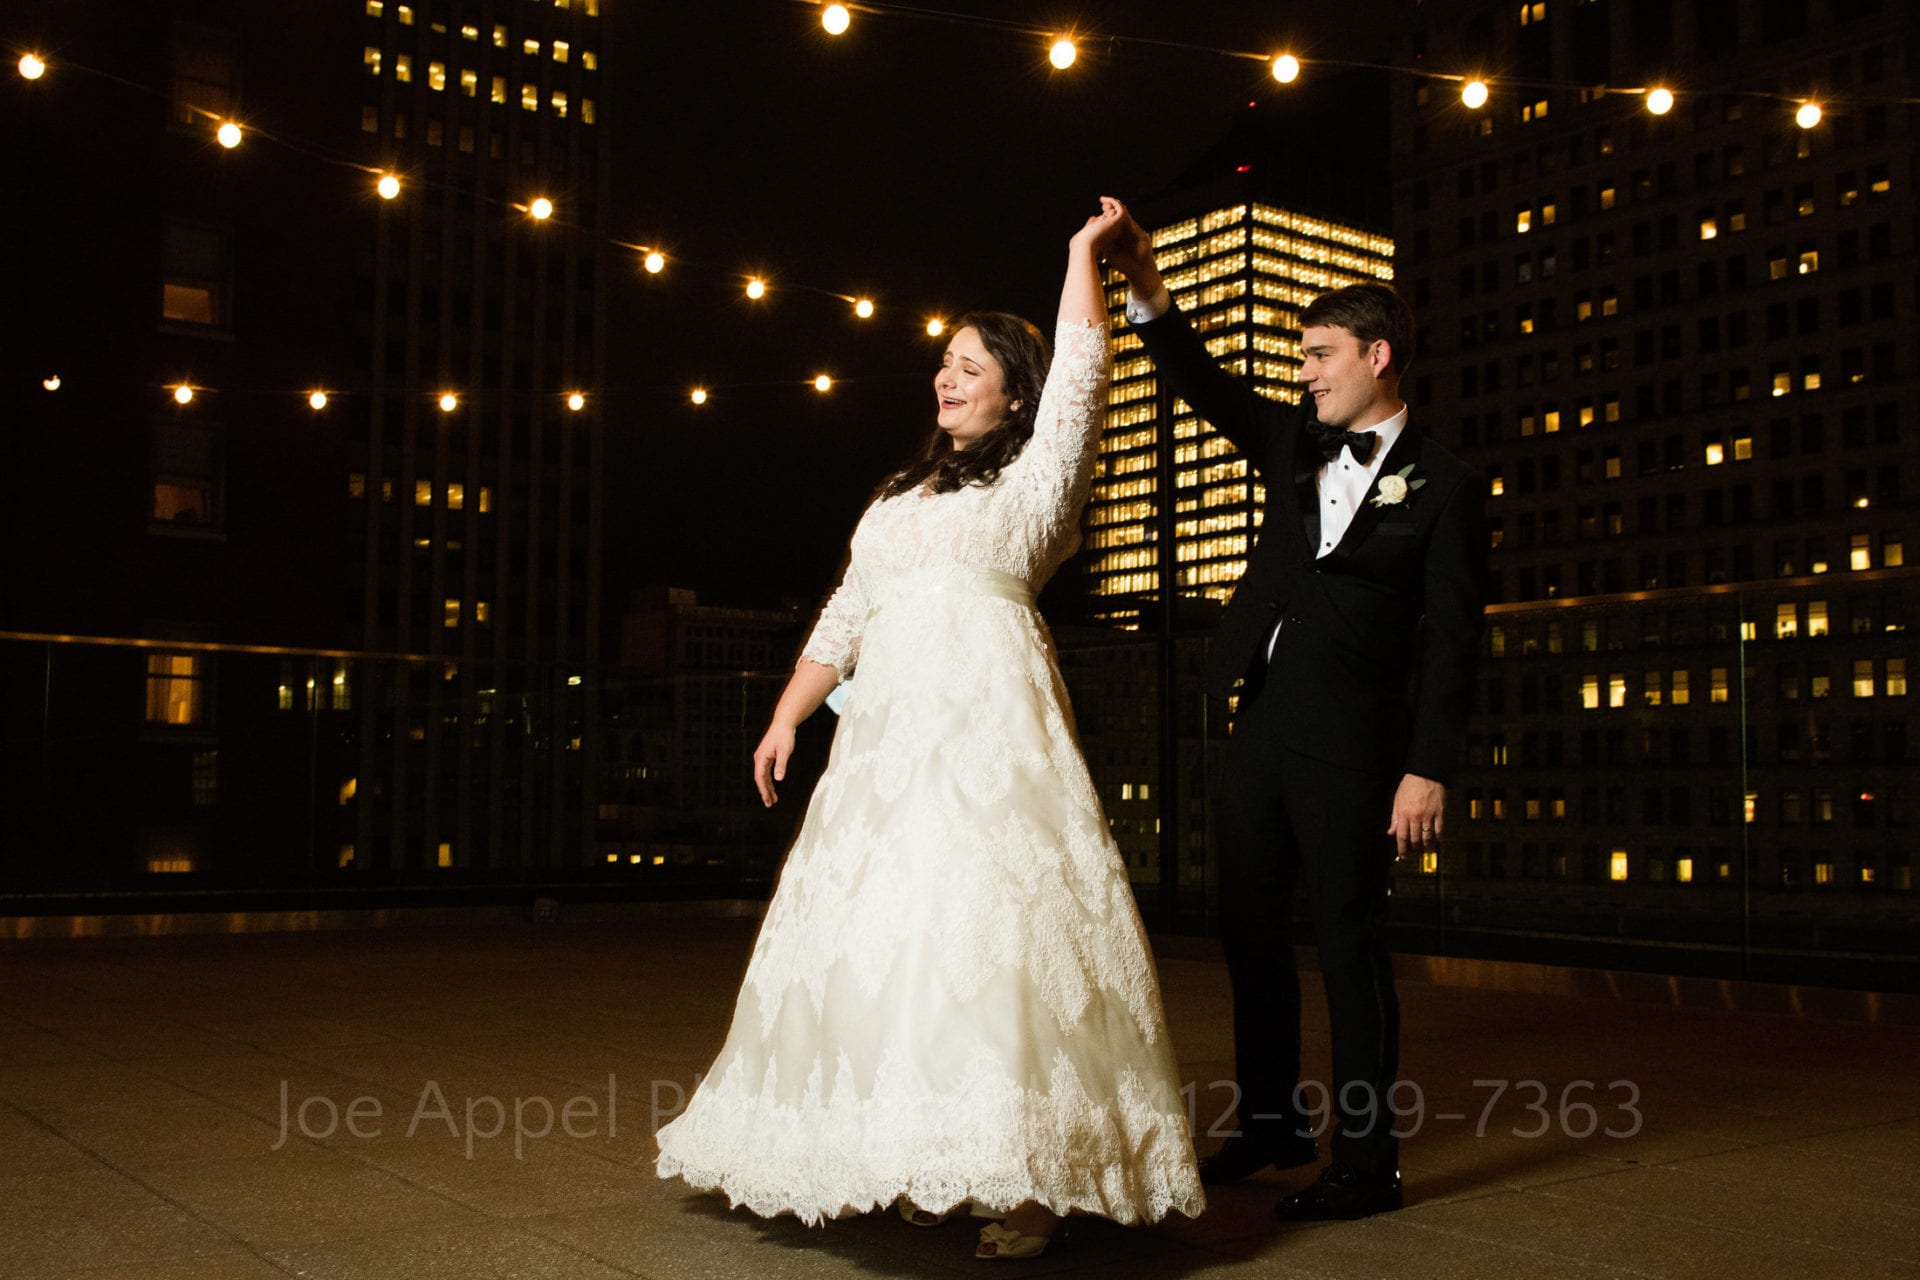 a bride and groom dance on a rooftop overlooking the city at nighttime